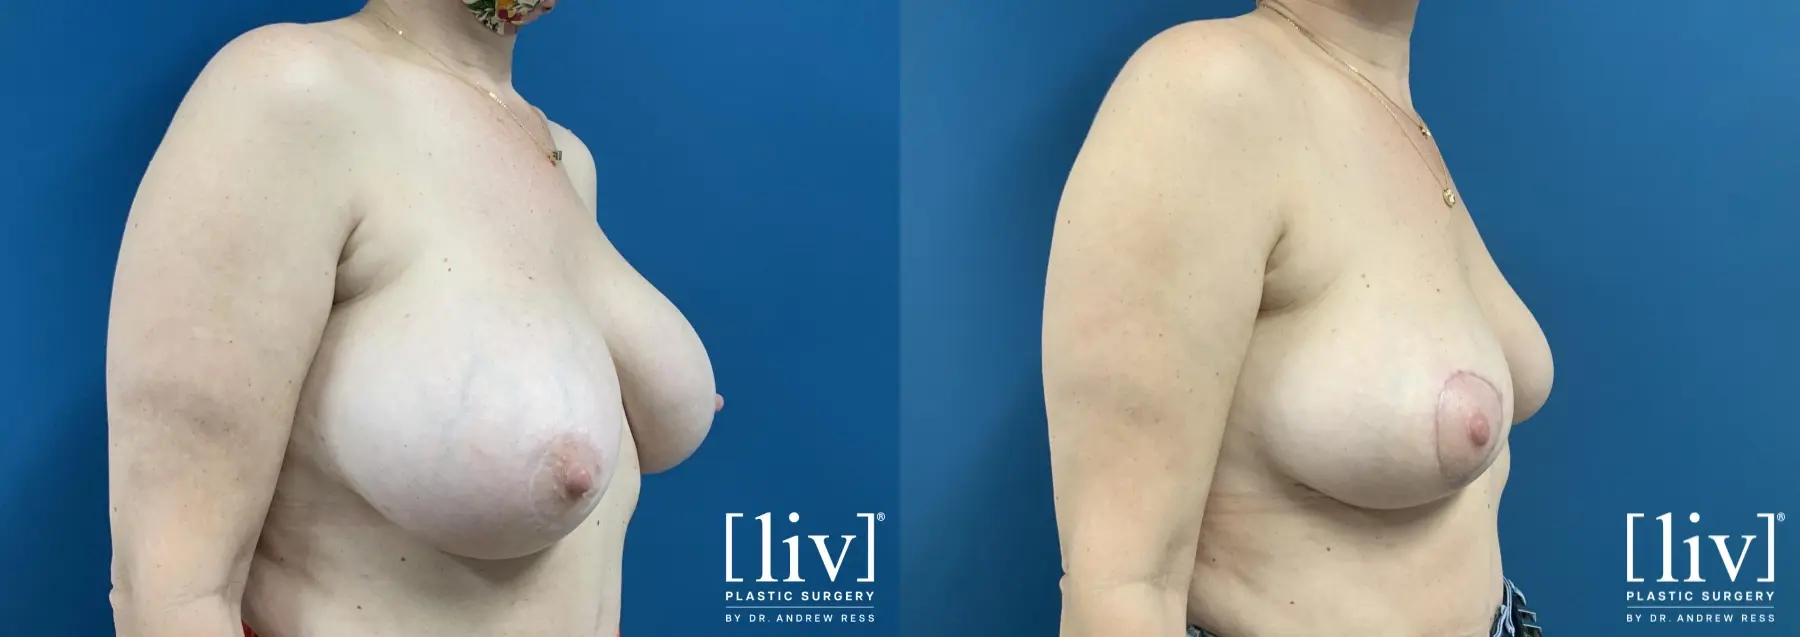 Implant removal with Breast Lift and Fat Transfer to Breast  - Before and After 4